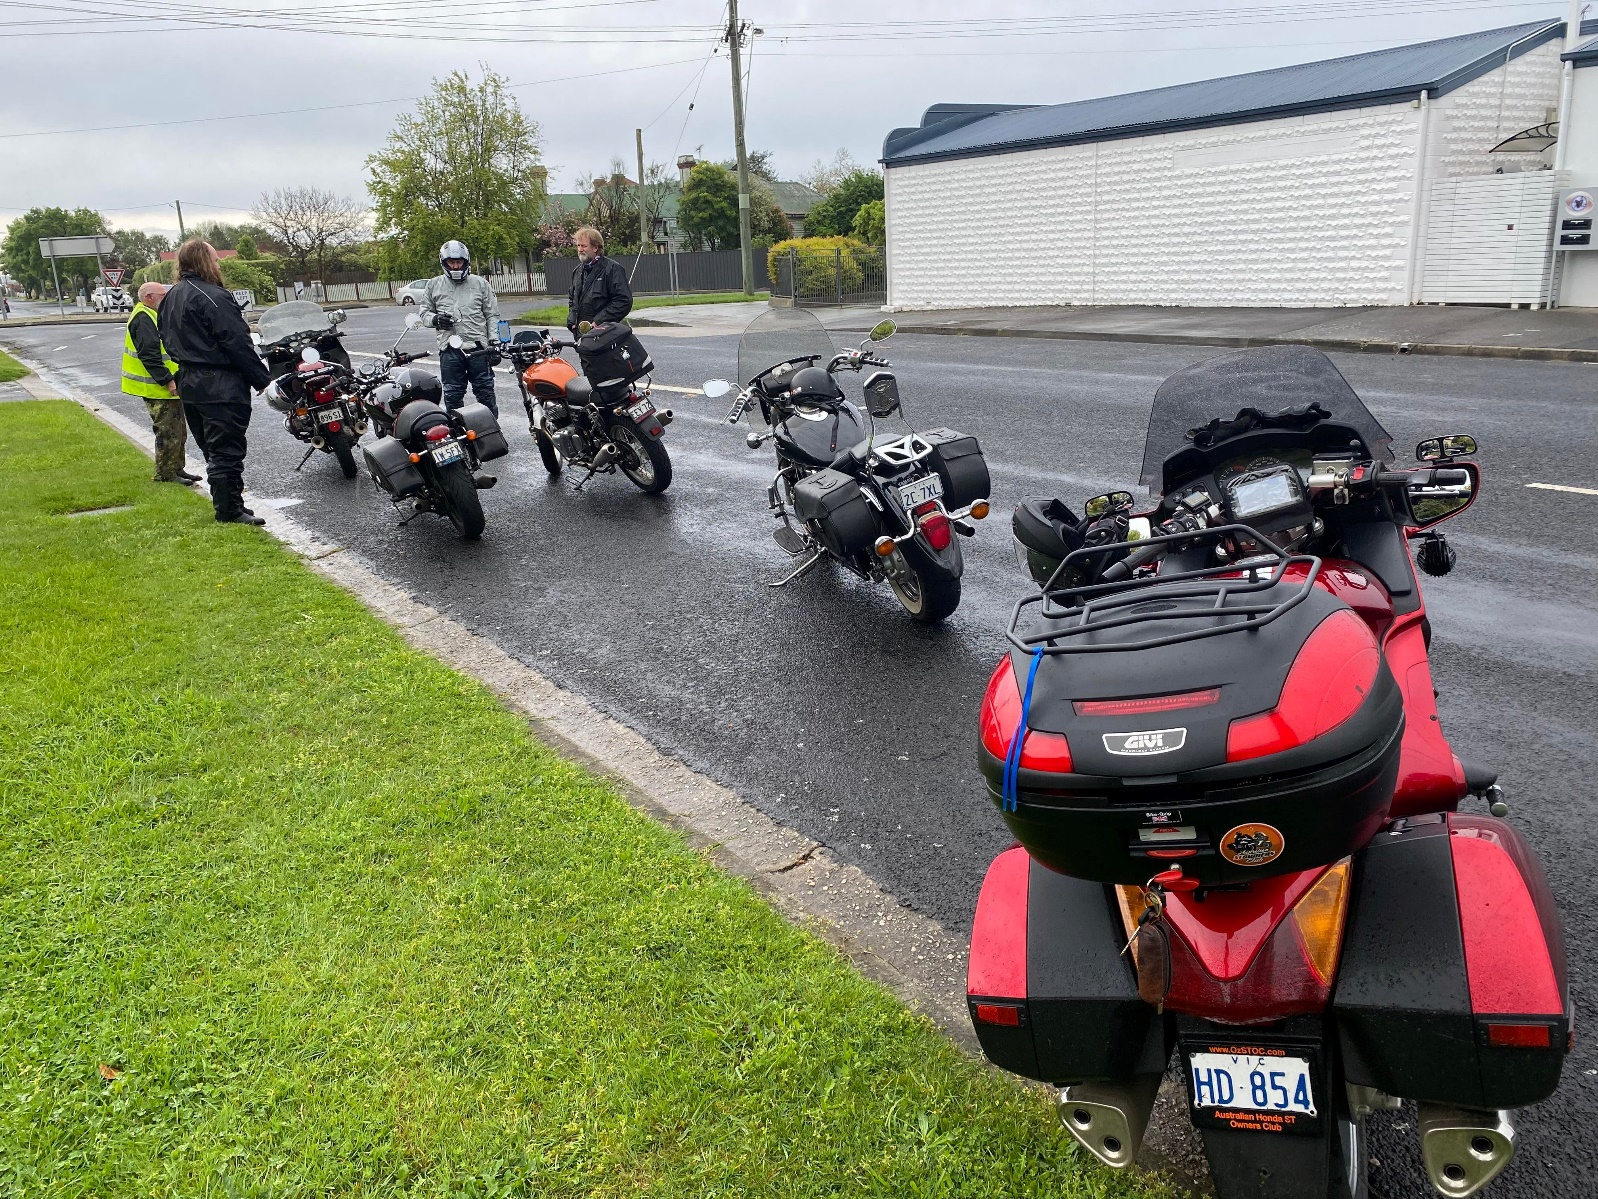 A group of motorcycles parked on the side of a road Description automatically generated with medium confidence